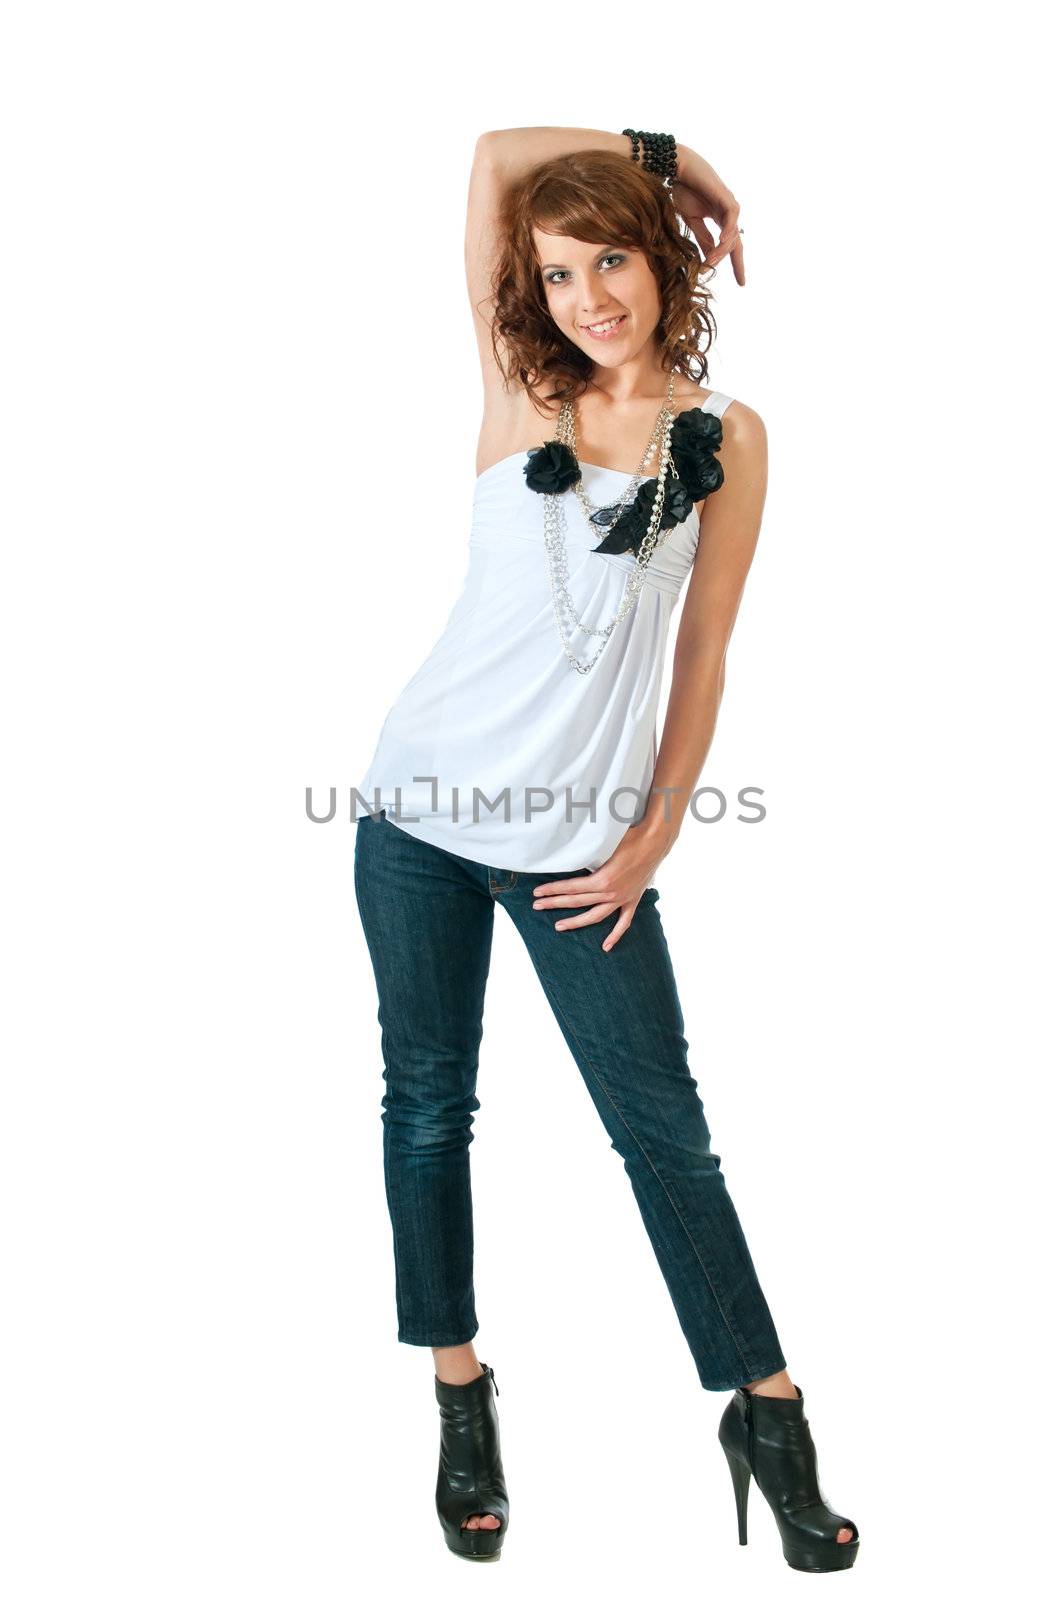 Pretty brunette woman standing in high-heels against a white background